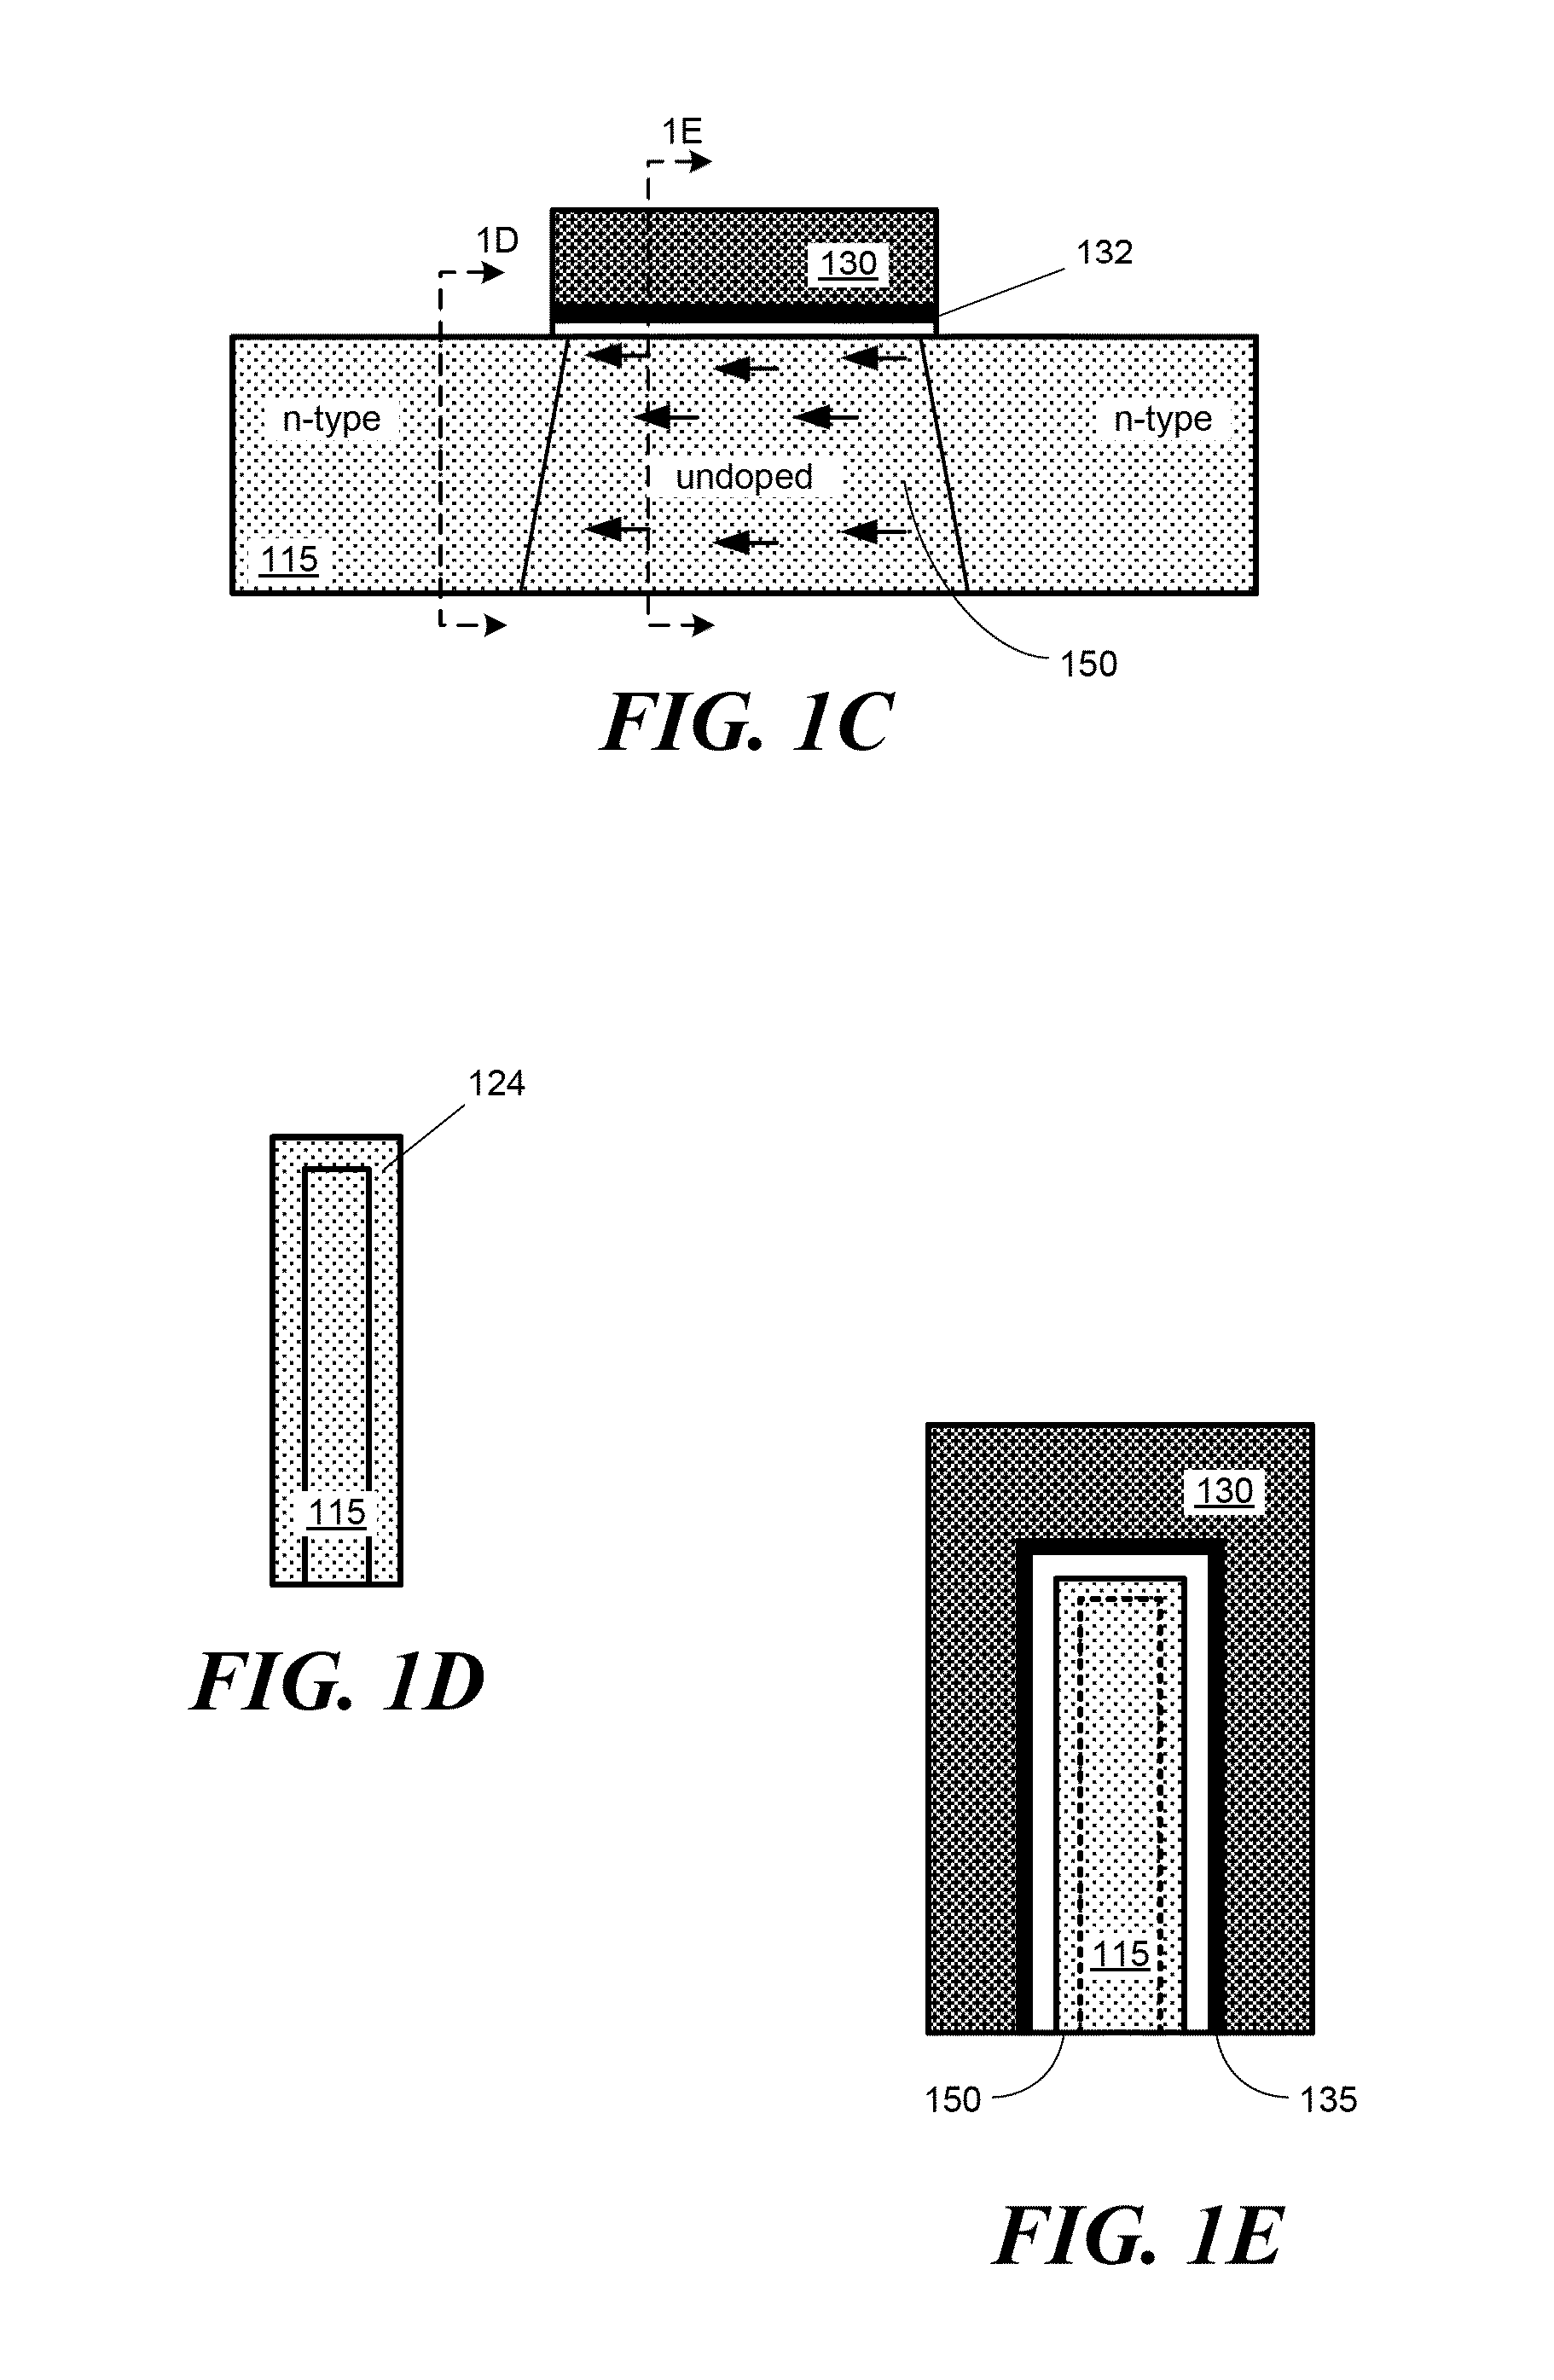 Methods for forming vertical and sharp junctions in finFET structures